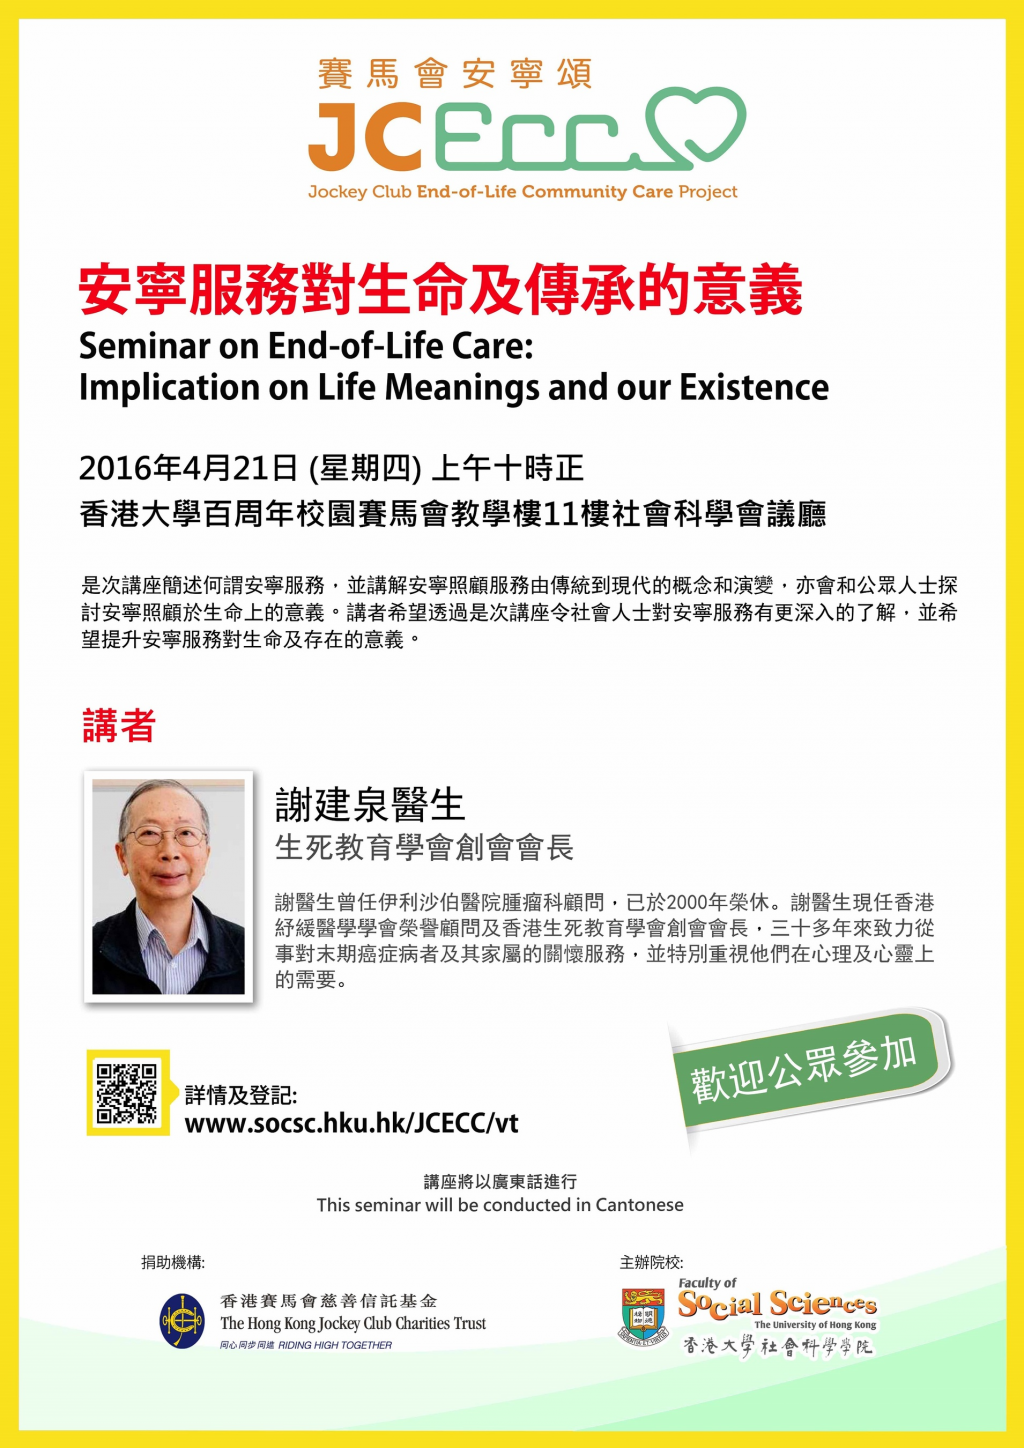 Seminar on End-of-Life Care: Implication on Life Meanings and our Existence